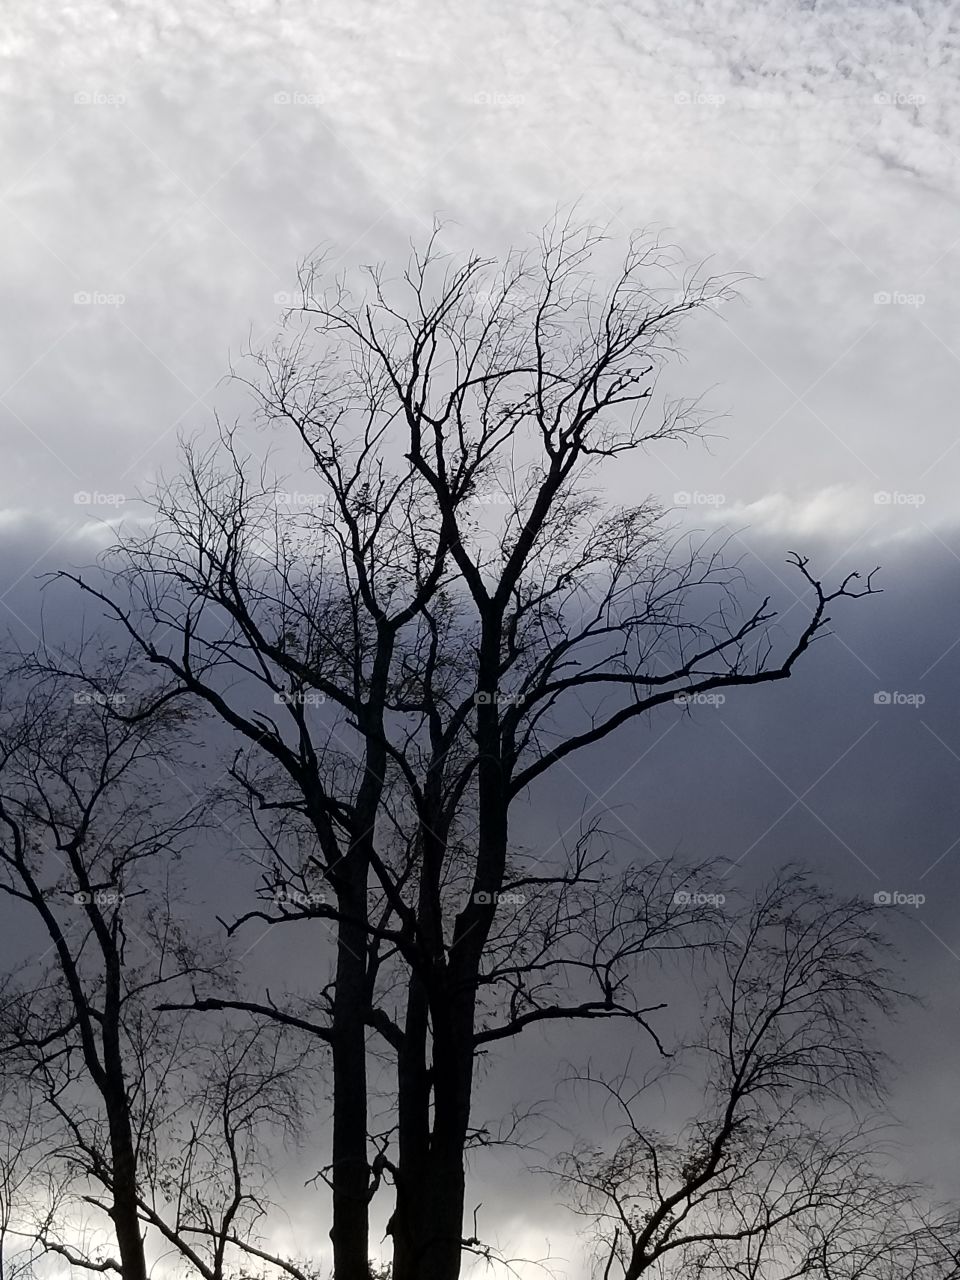 one dark and stormy night ... Cloud cover backgrounds a late-autumn tree on